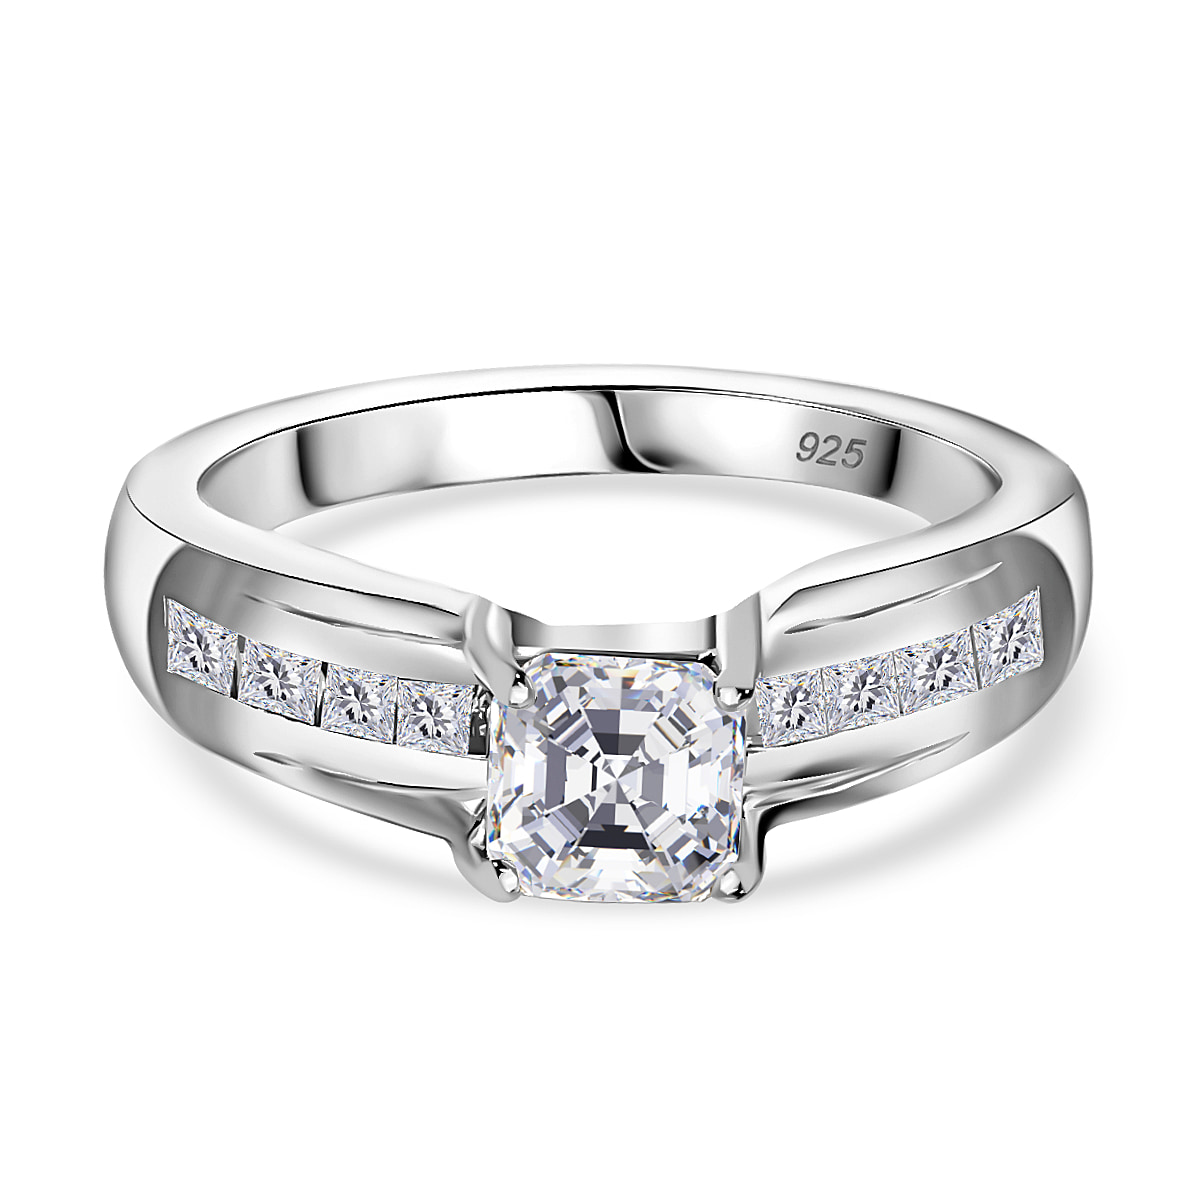 Moissanite  Main Stone With Side Stone Ring in Platinum Overlay Sterling Silver 1.30 ct  1.149  Ct.